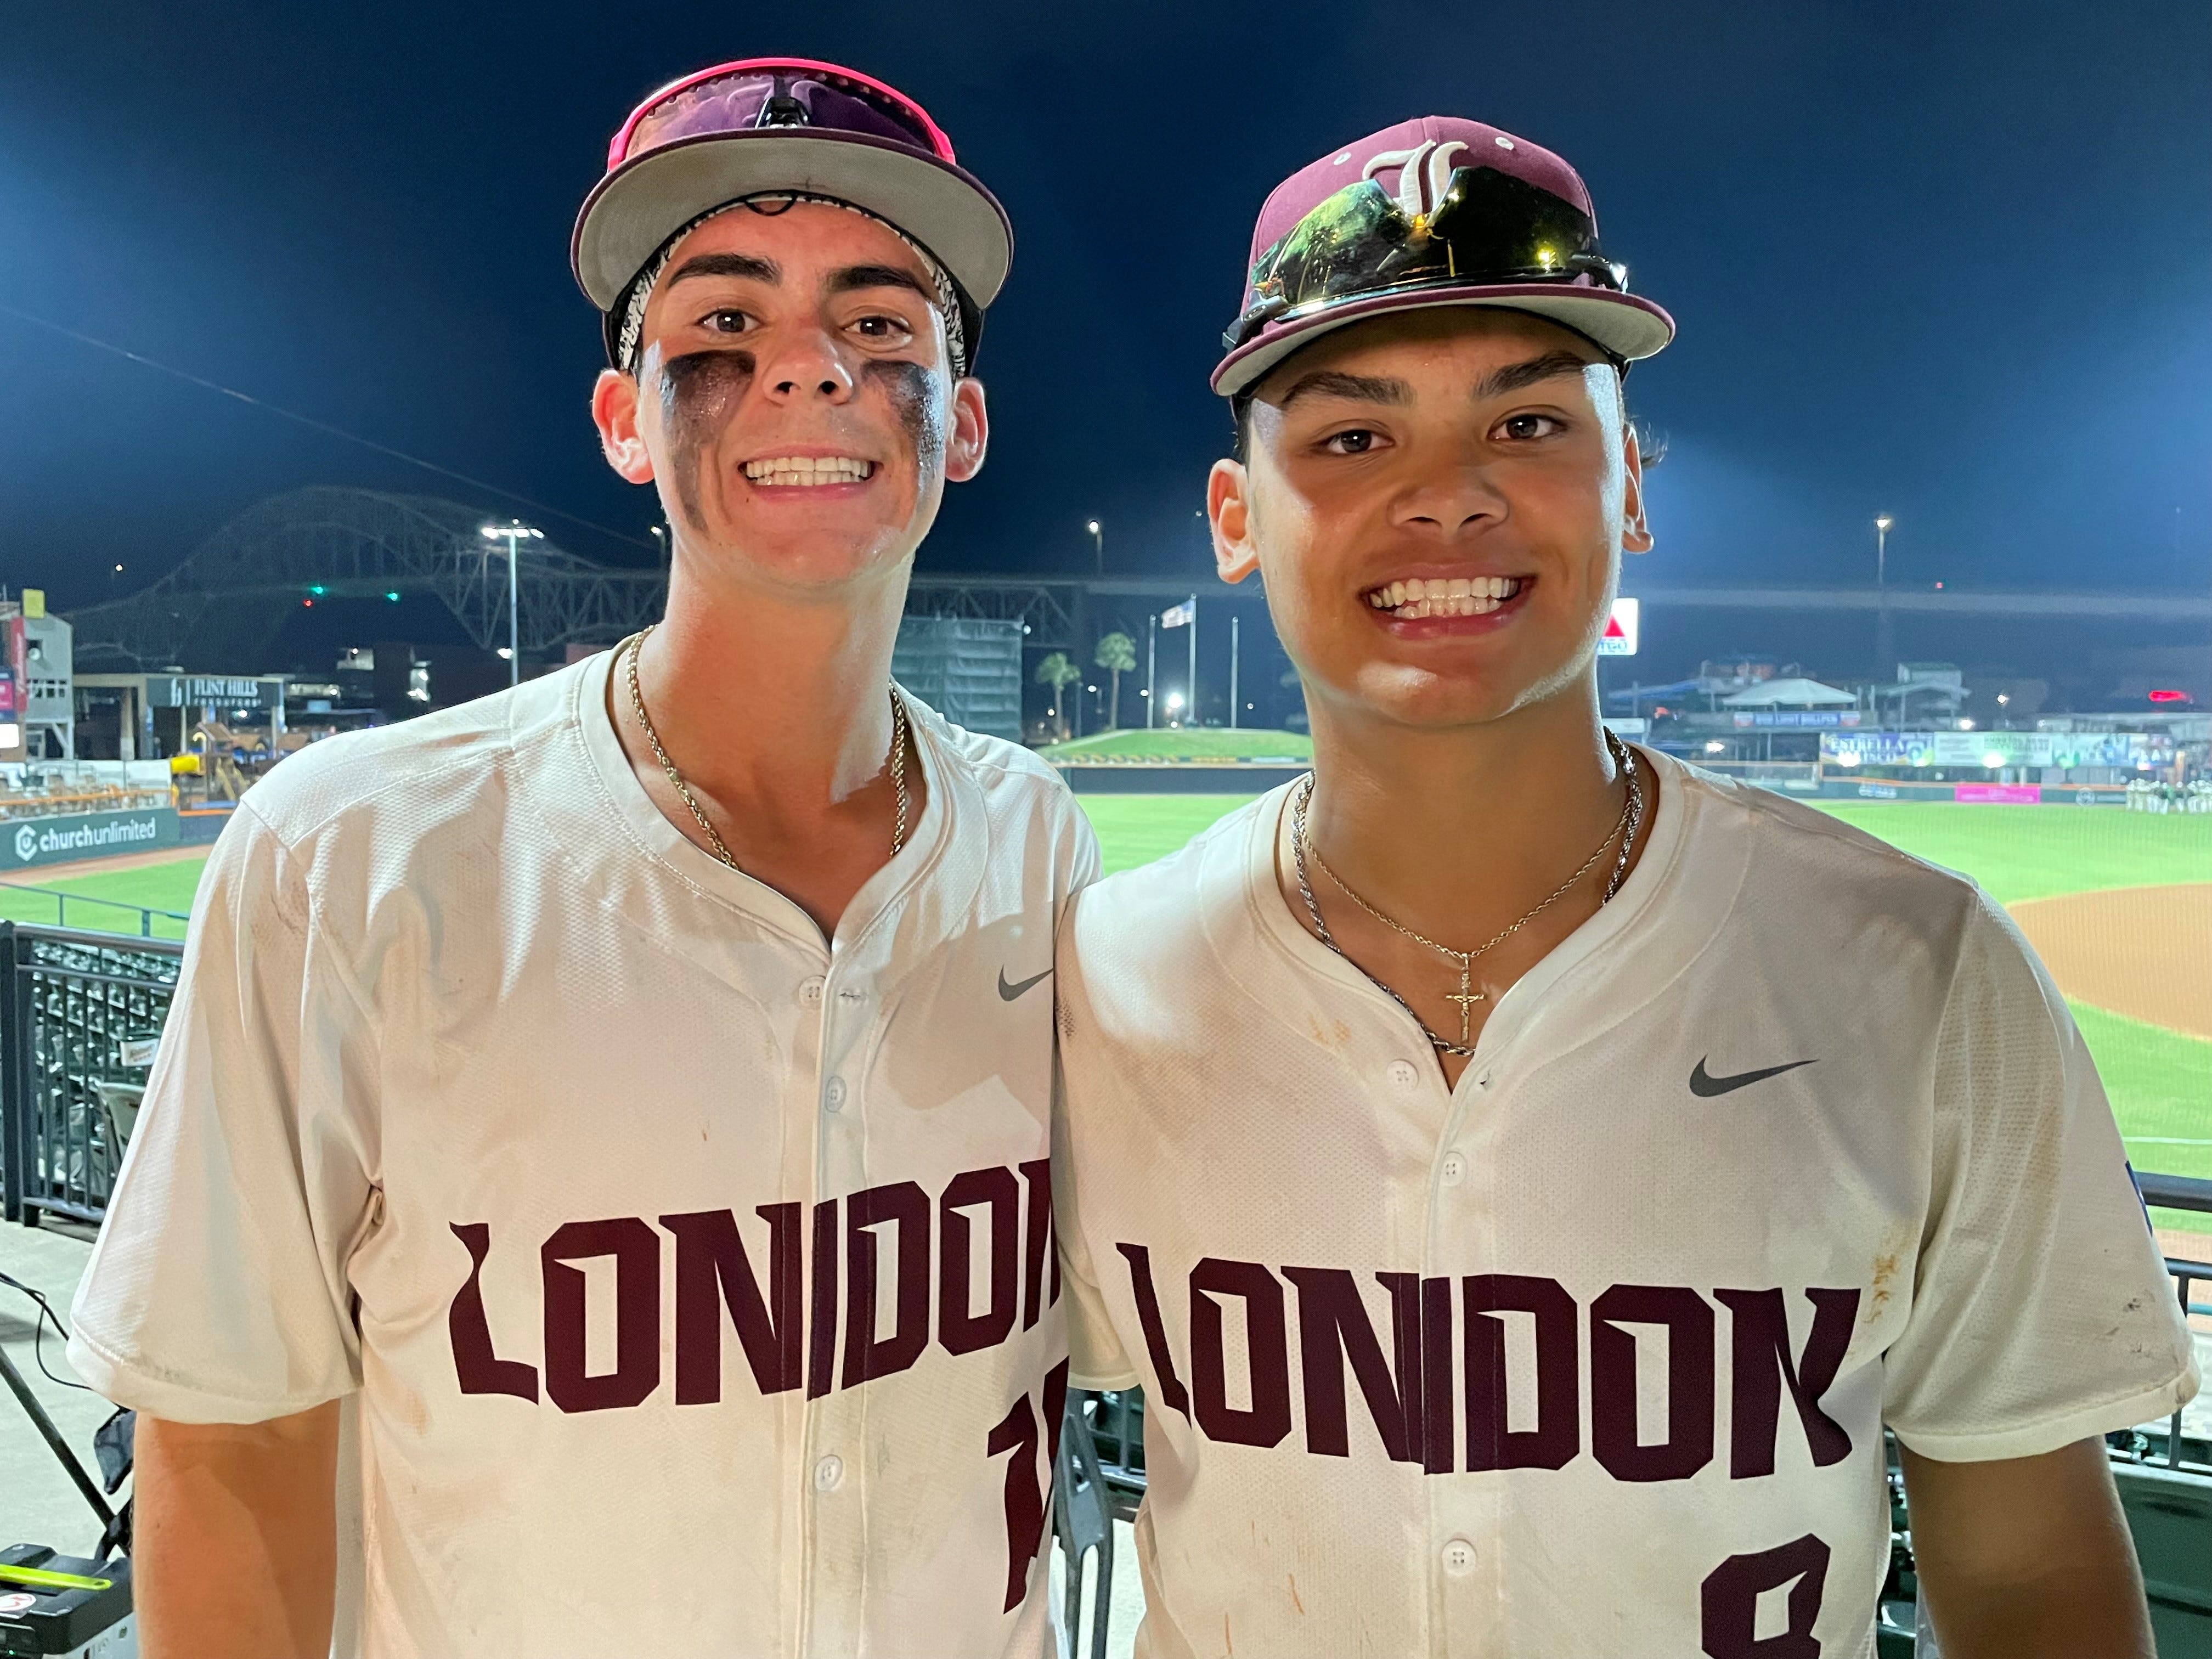 Back to Round Rock: London baseball overcomes series deficit to return to state tournament